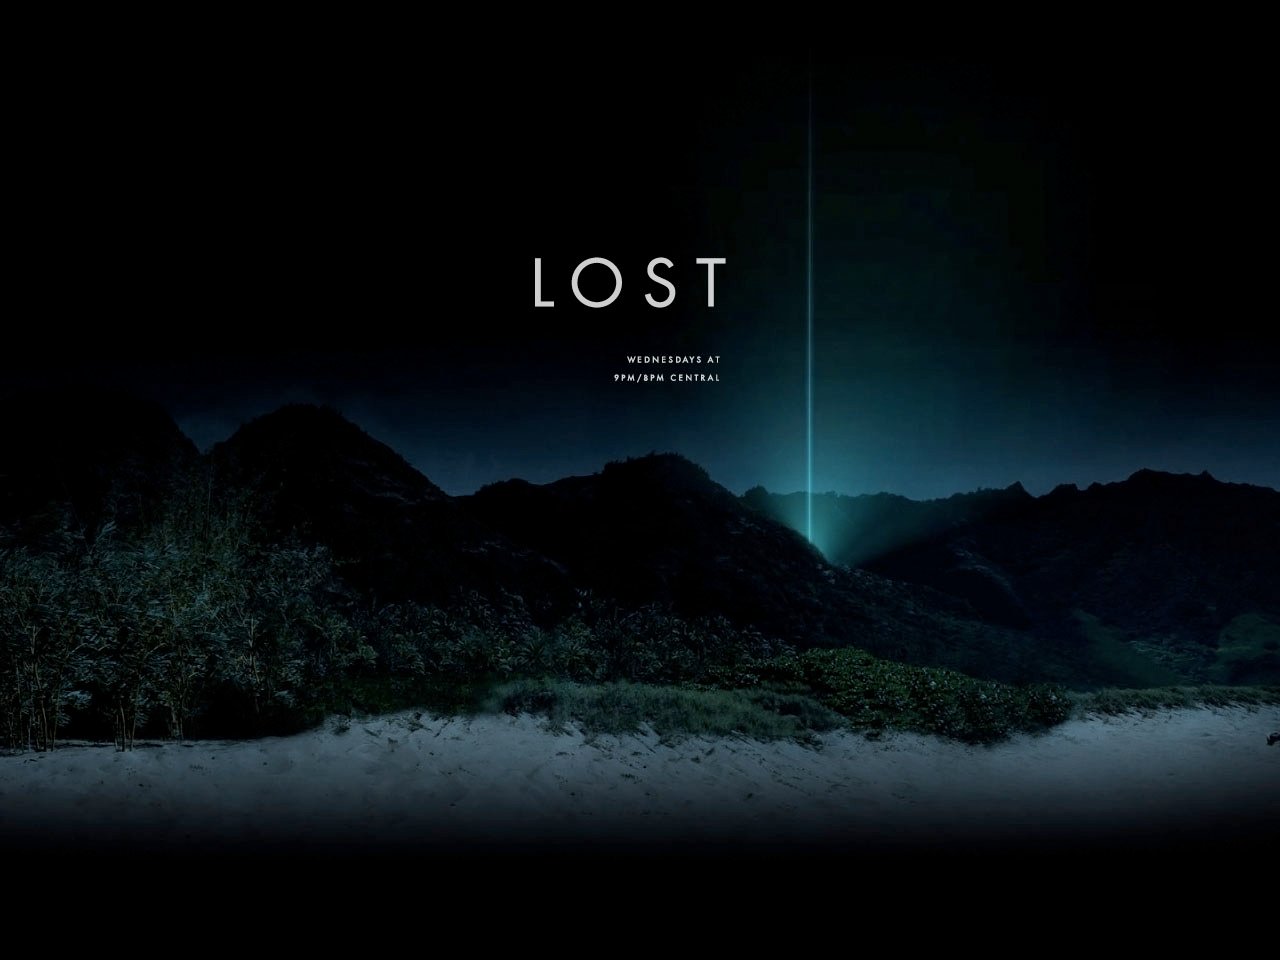 Lost images the lost HD wallpaper and background photos 747782